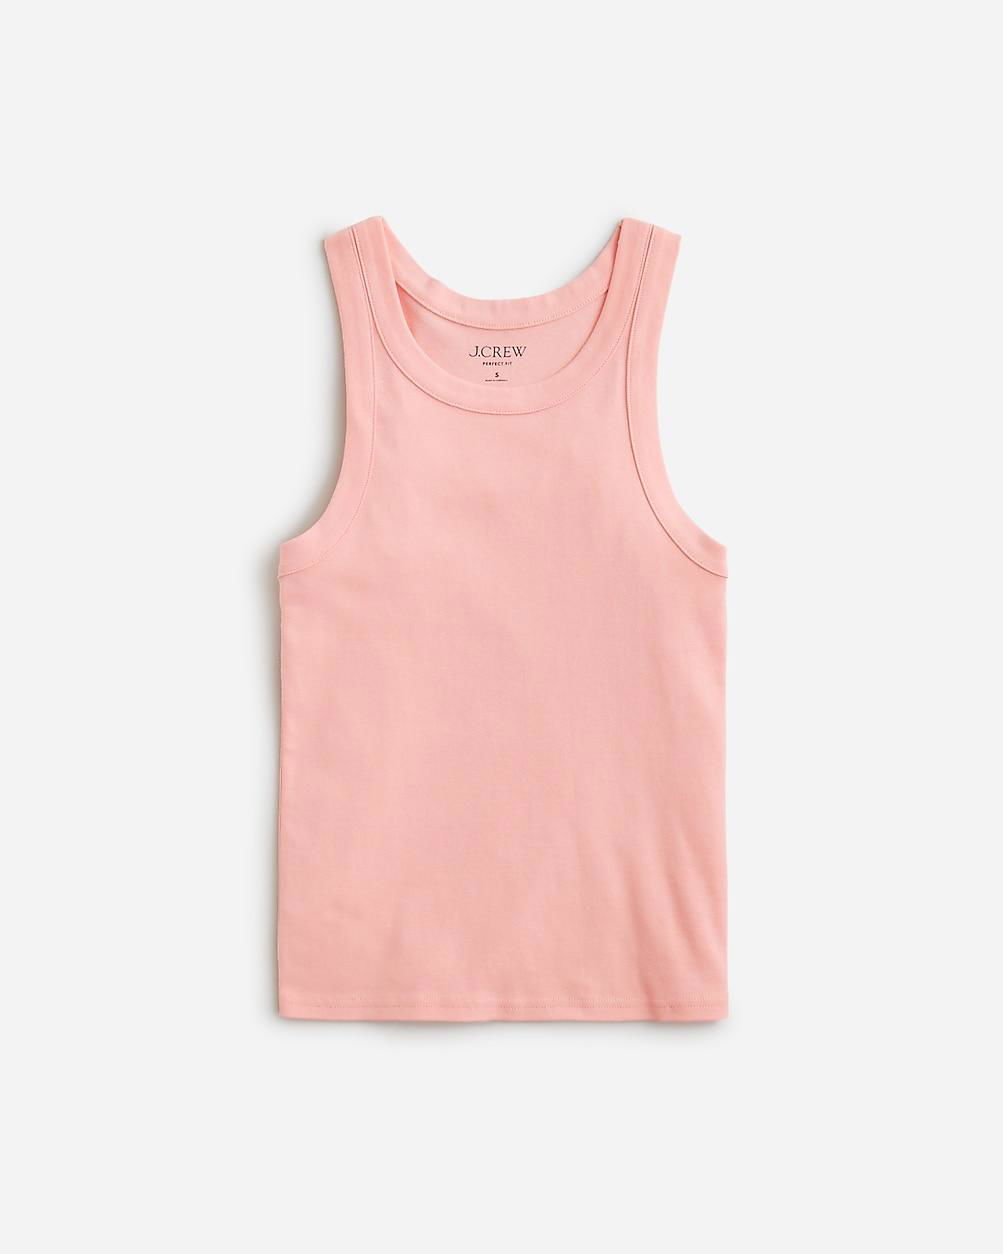 Perfect-fit high-neck tank by J.CREW